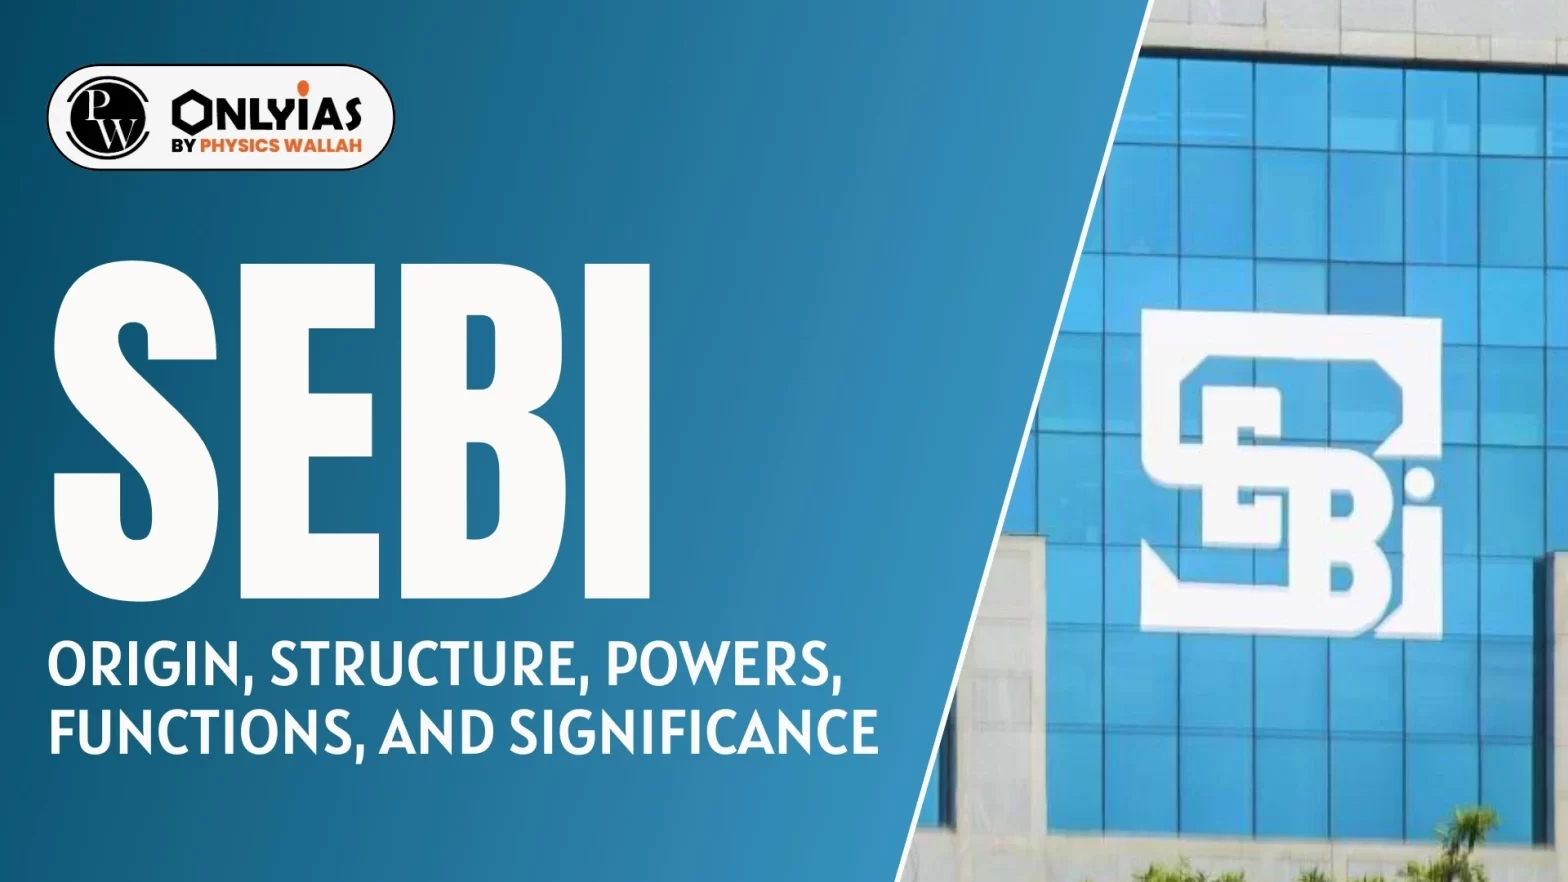 SEBI: Origin, Structure, Powers, Functions, and Significance